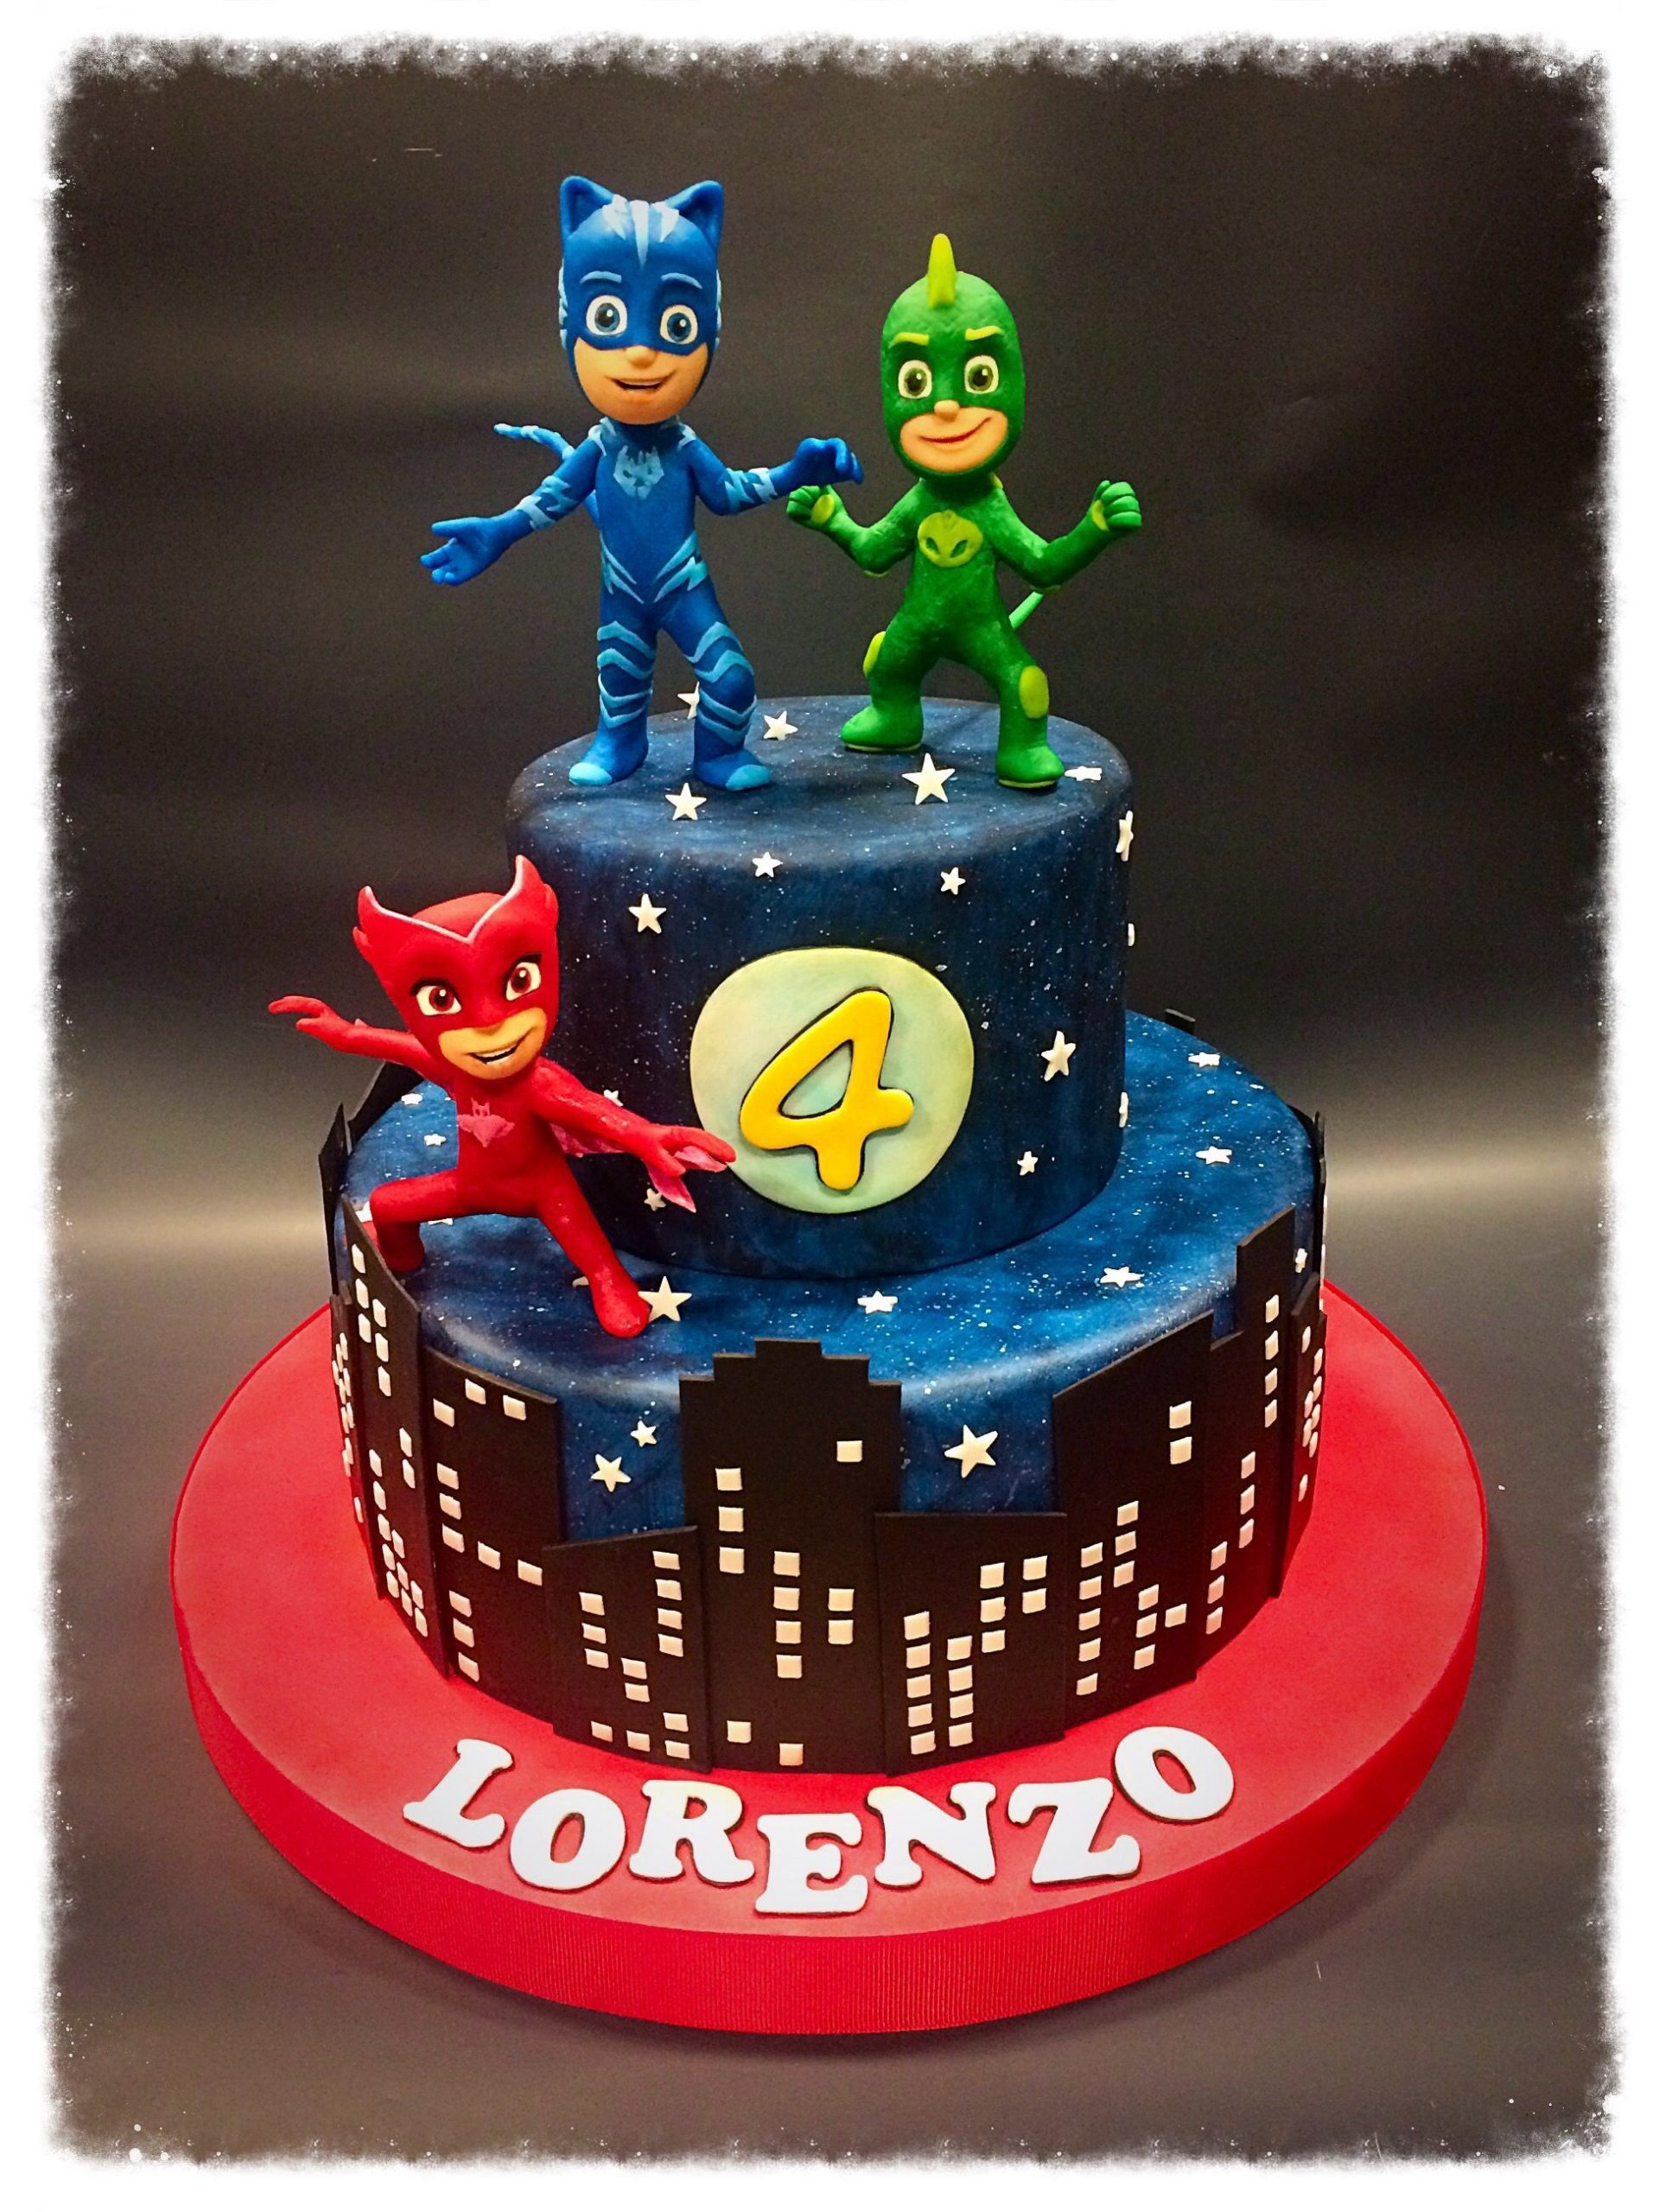 20 Best Pj Masks Birthday Cake Ideas in 2020 (With images ...